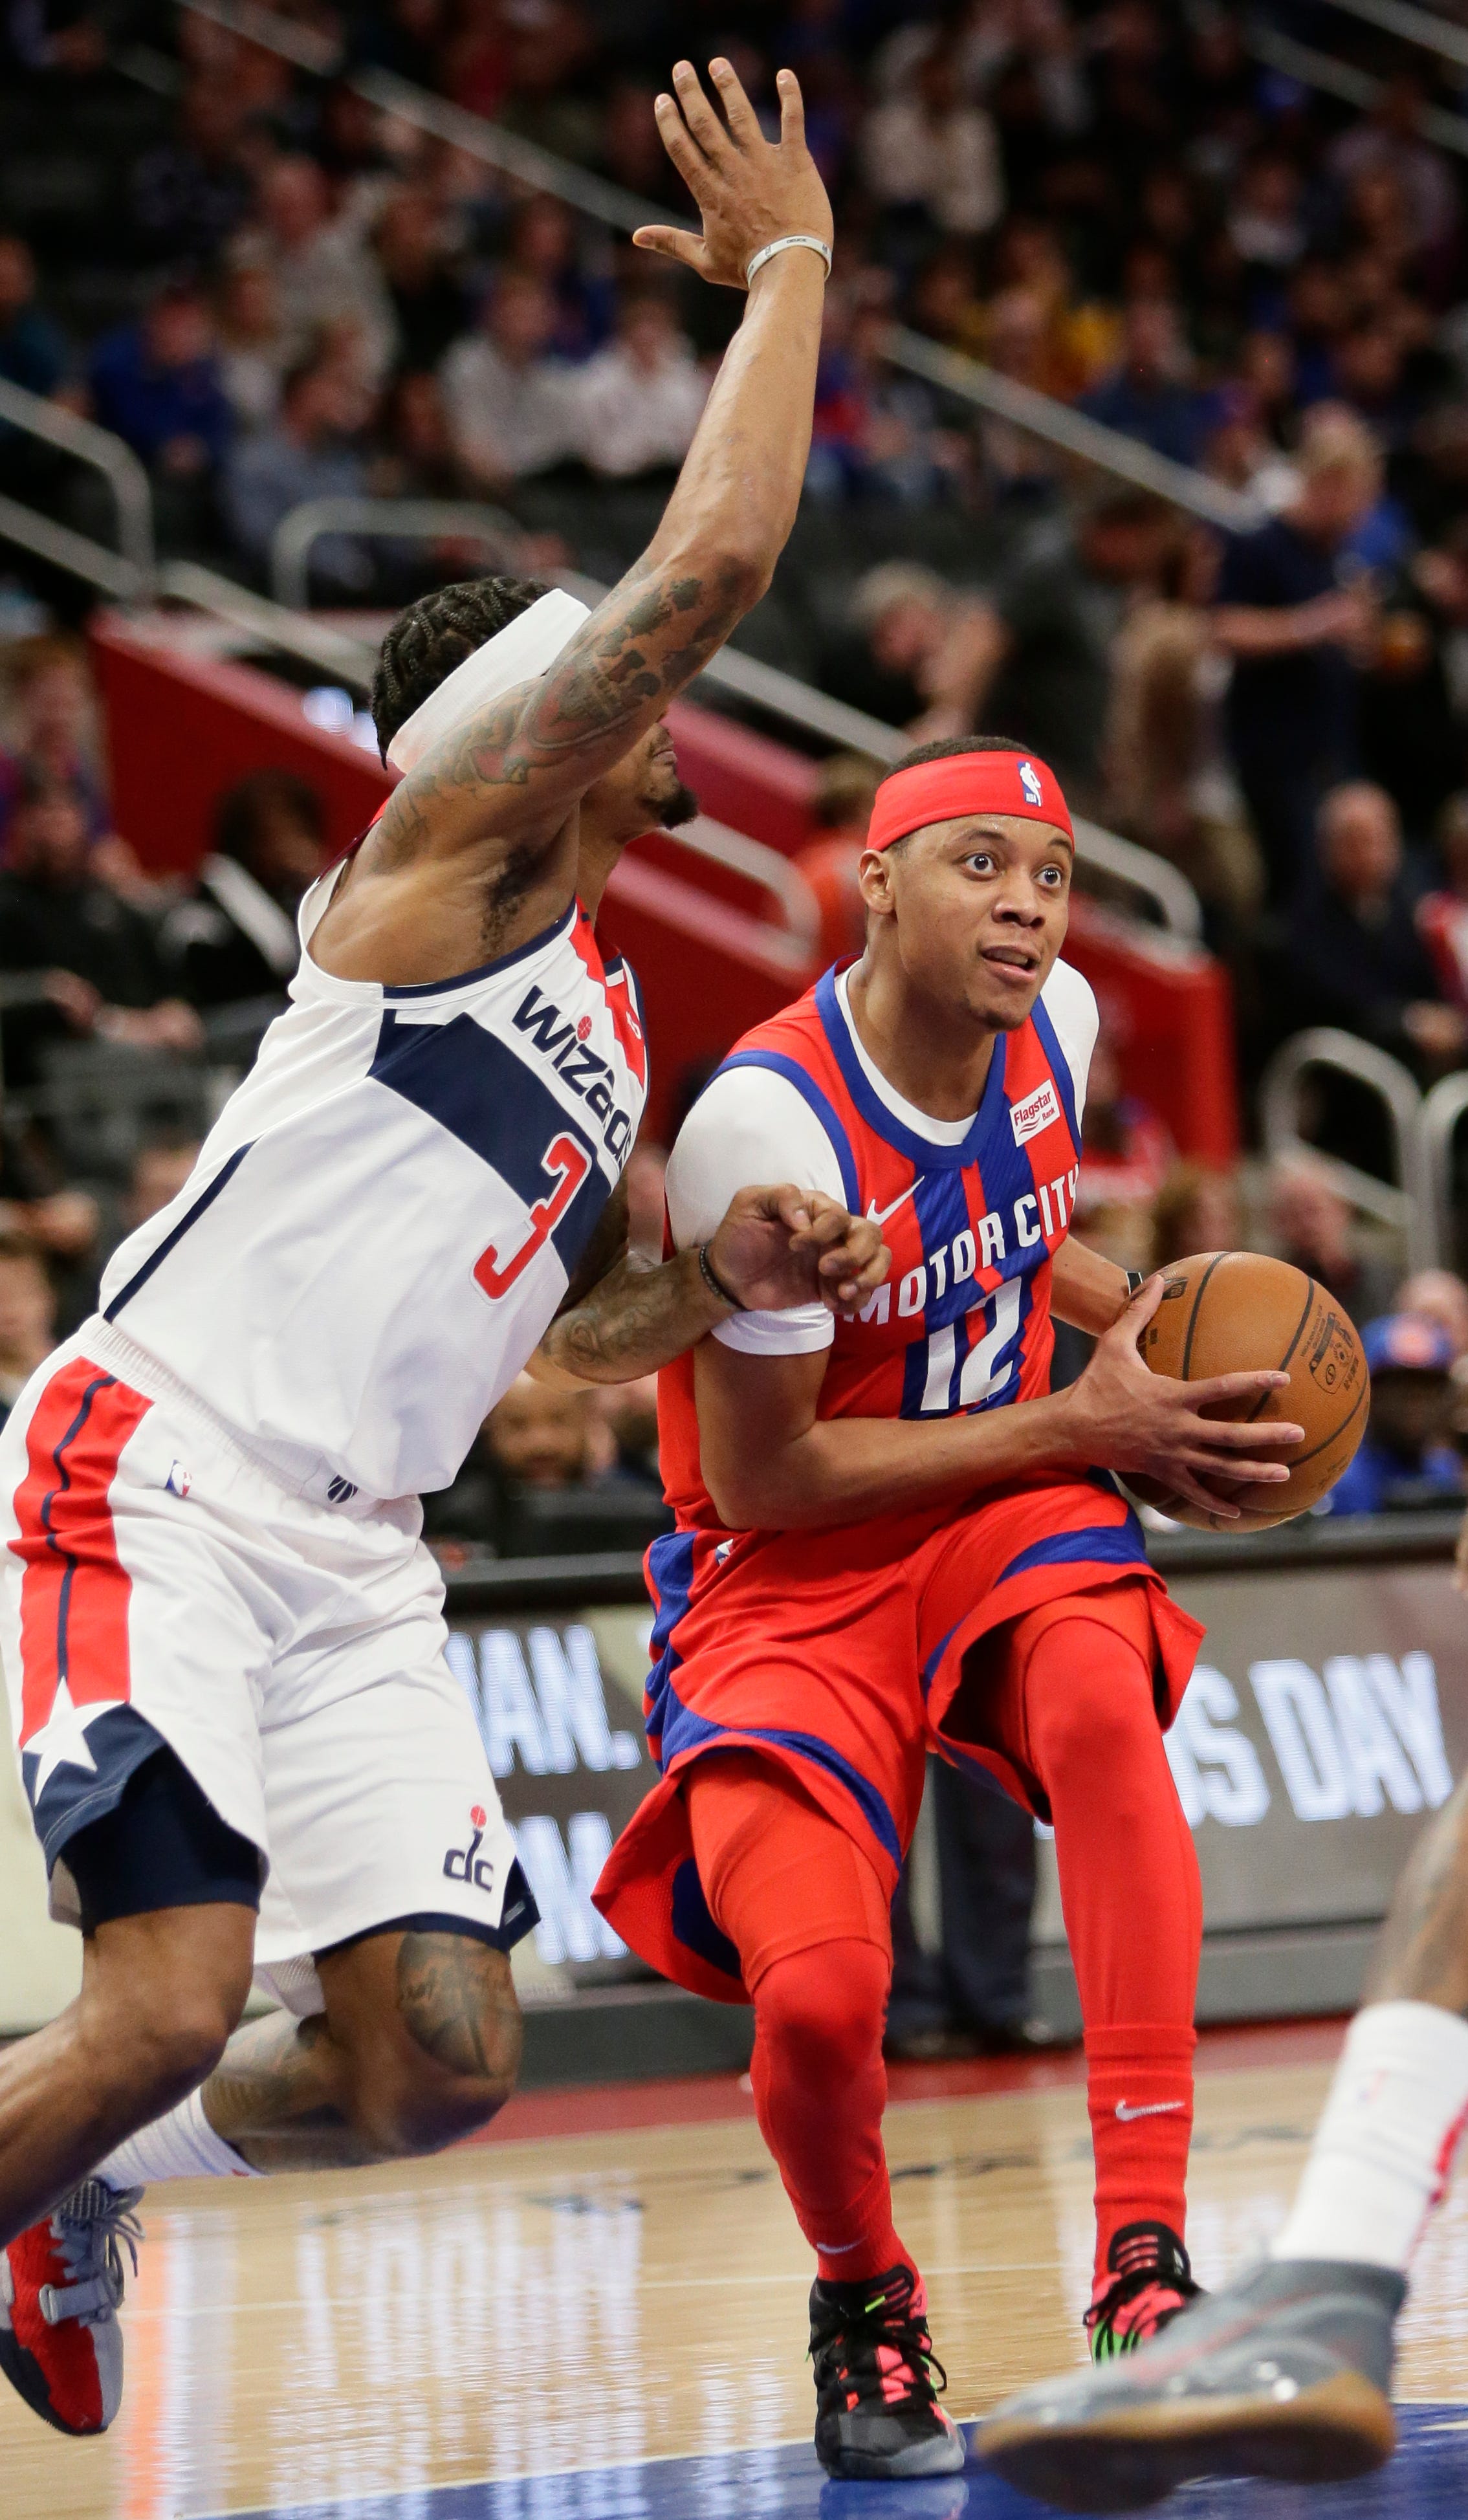 Detroit Pistons guard Tim Frazier (12) is defended by Washington Wizards guard Bradley Beal (3) during the first half.